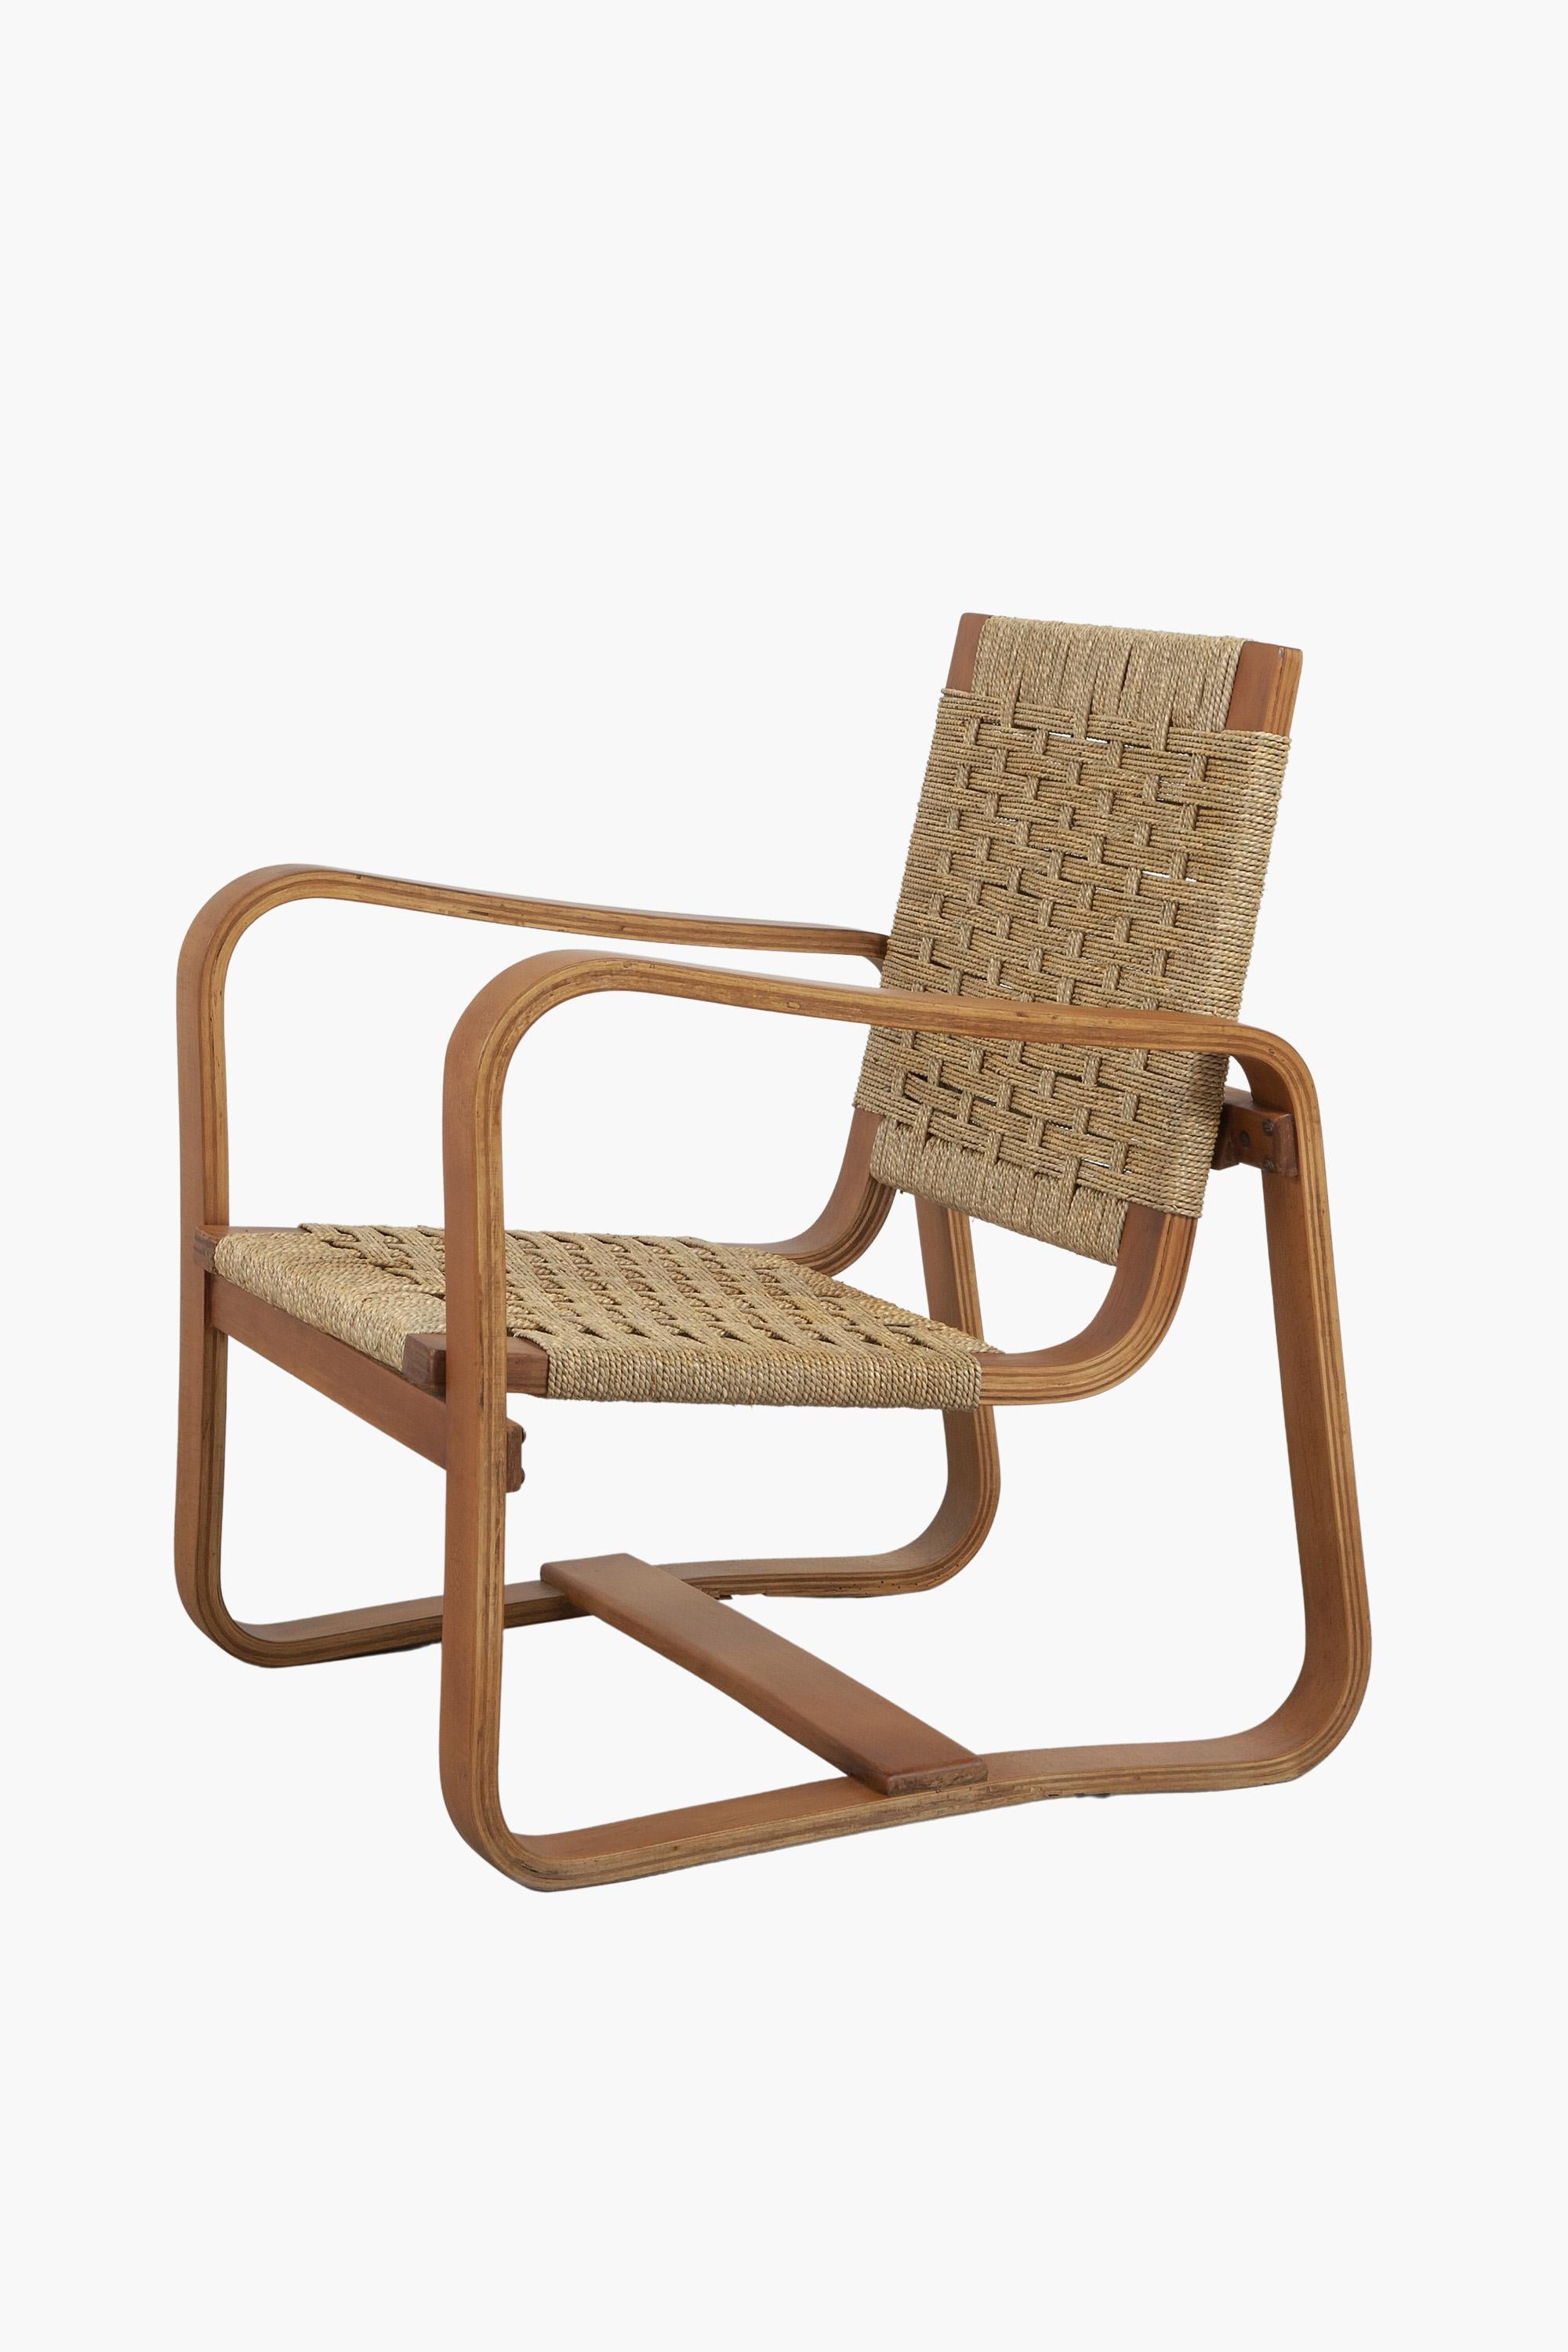 BBentwood armchair designed by Giuseppe Pagano Pogatschnig & Gino Maggioni for the Bocconi University, 1942.

Curved laminated wood and woven rope. Original woven rope is in excellent condition.

Published: Domus 170 (February 1942), cover & p.